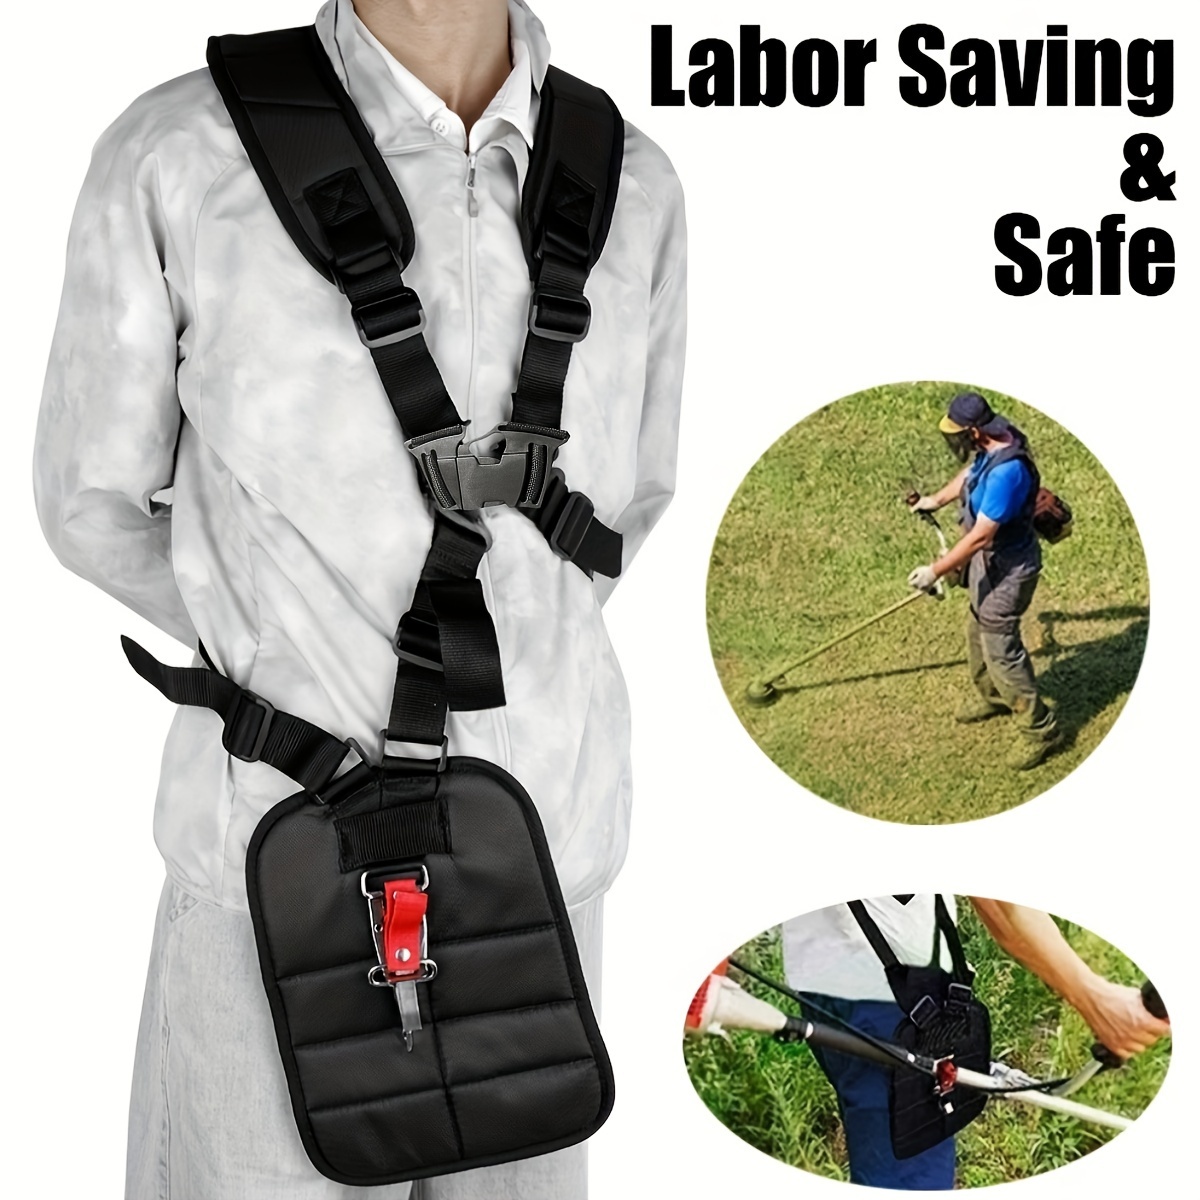 

Heavy-duty Trimmer Shoulder Strap With Soft Padding - Universal Fit, Durable Polyamide Harness With Dual Buckles For Comfort And Stability - Ideal For , Brush Cutter, And Lawnmower - Single Pack